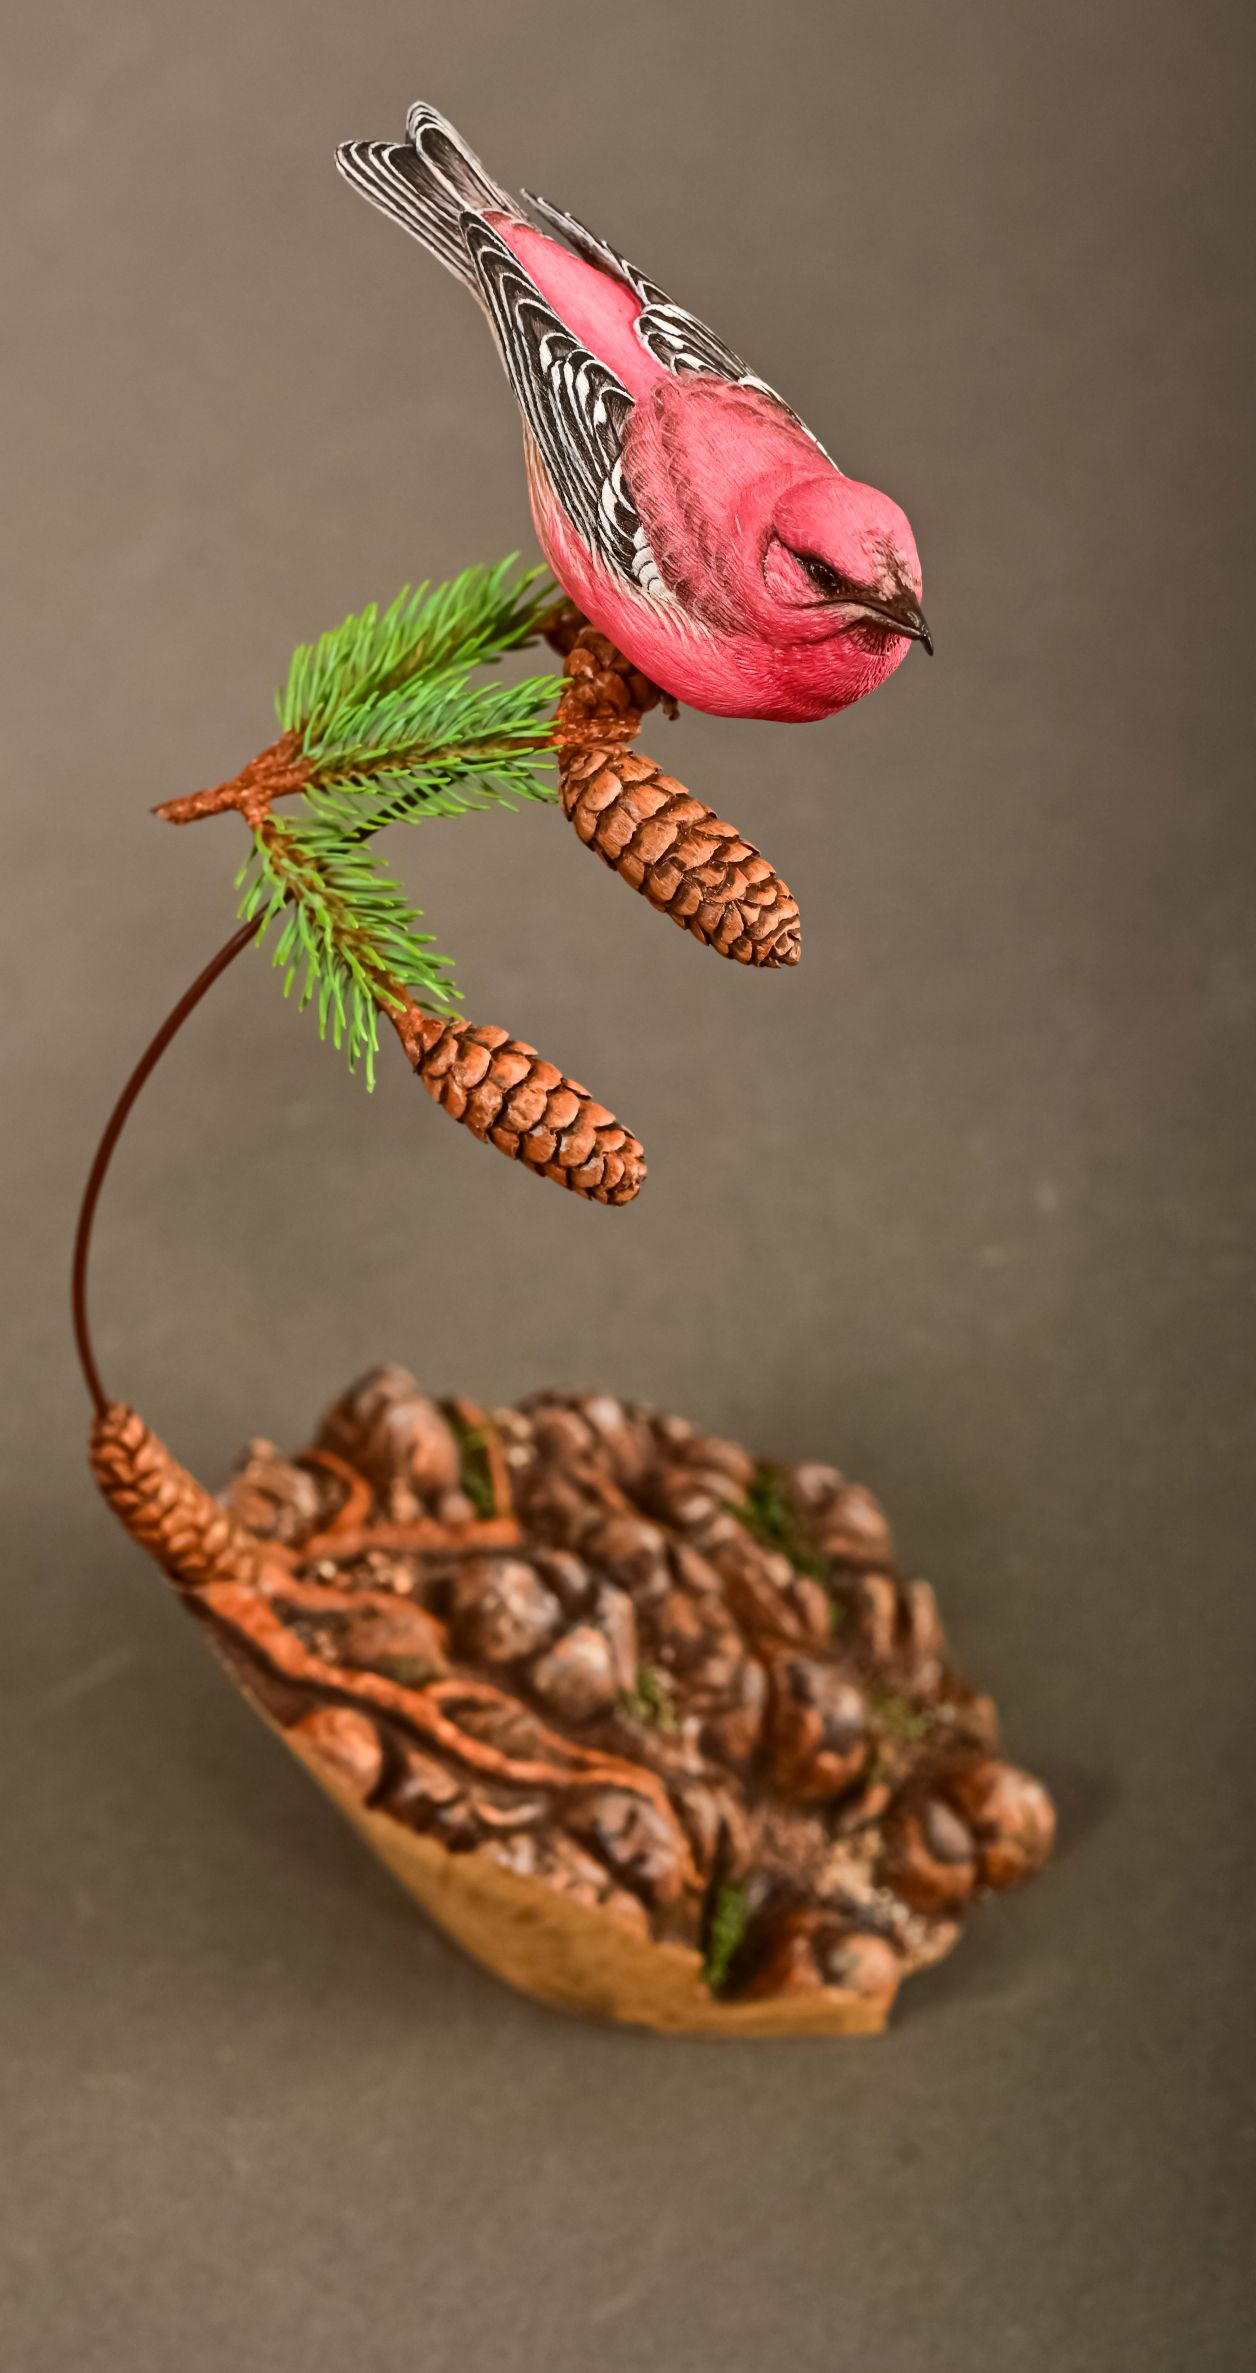 Best of Show - Hal McGray - White-winged Crossbill